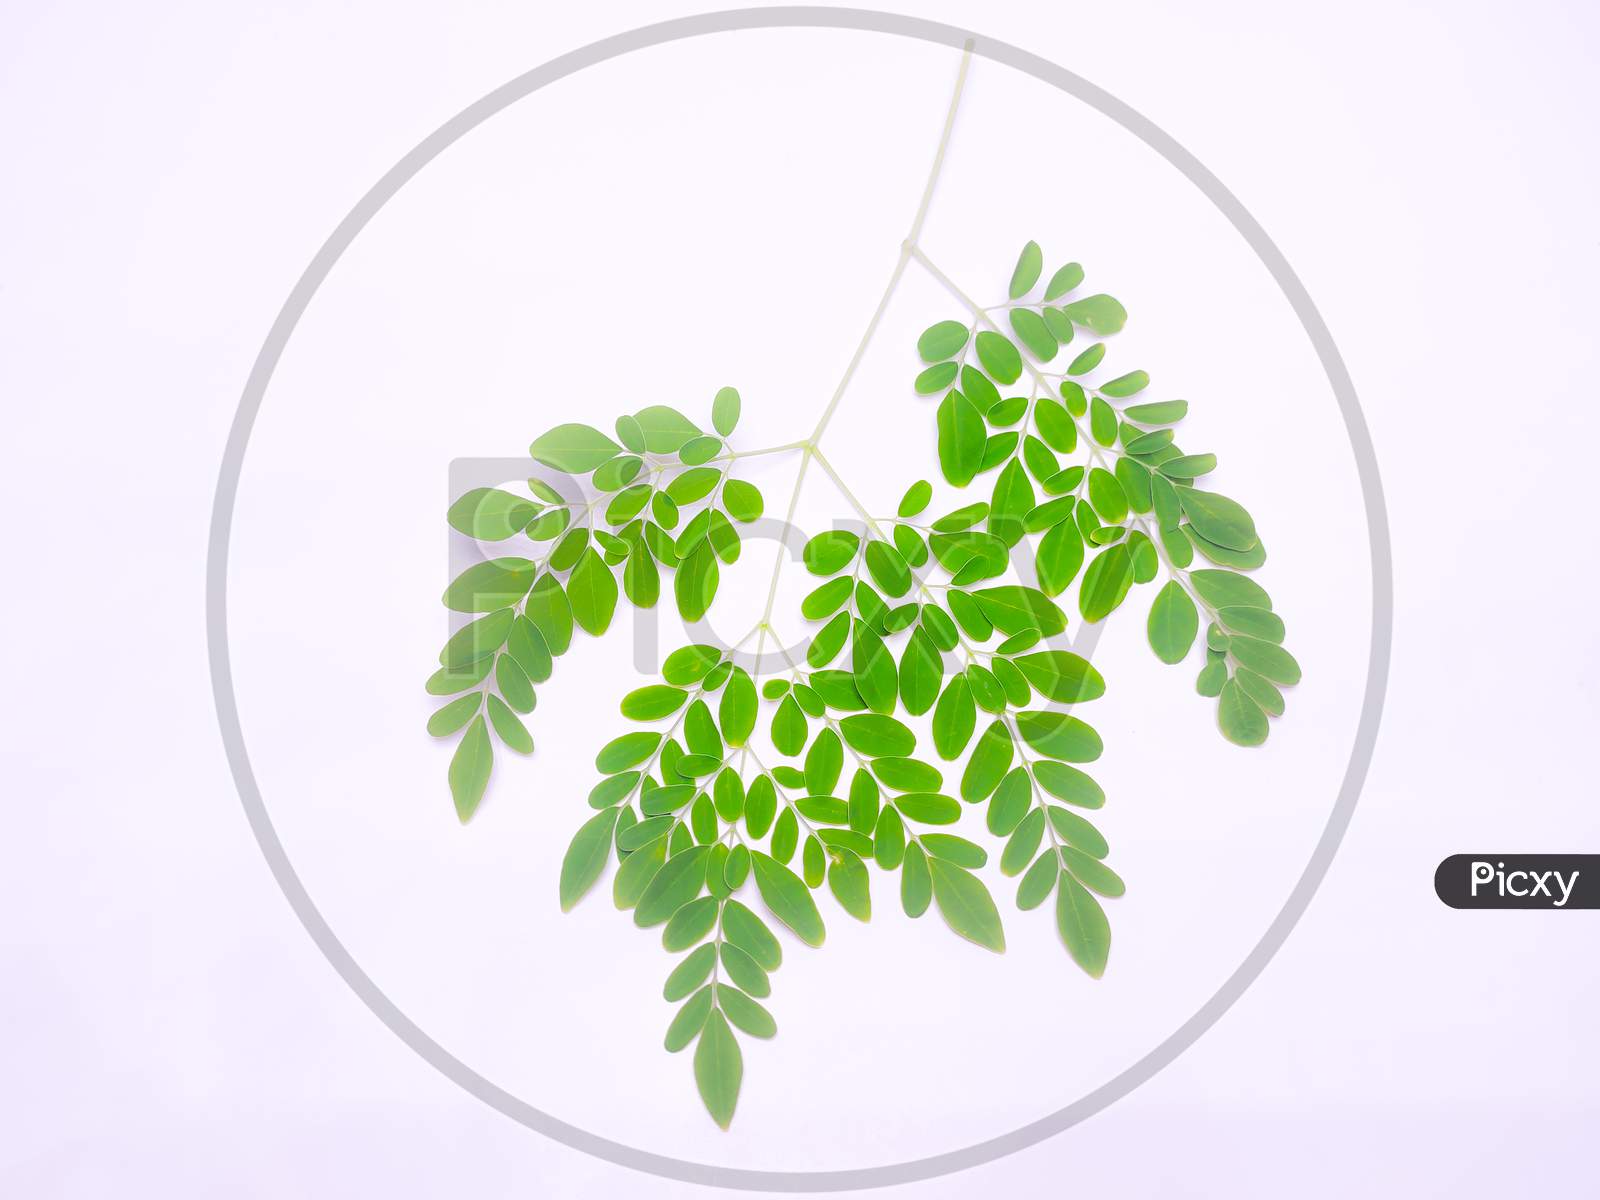 Green Leaves With Multiple Branches Focus At Center With Blurred And Isolated White Background